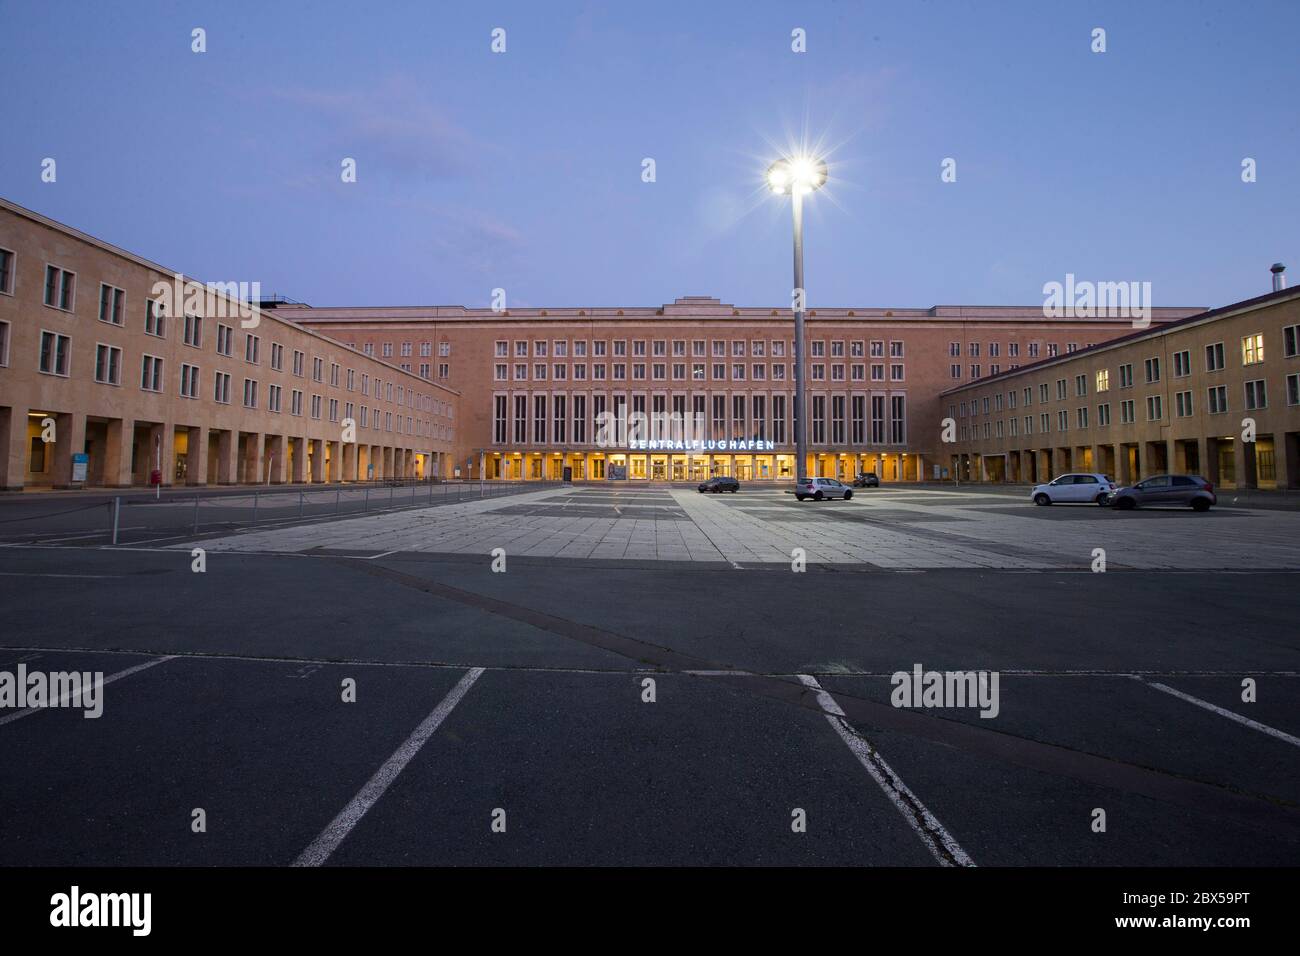 Berlin, Germany. 03rd Apr, 2020. The main entrance of the former central airport Berlin-Tempelhof during the blue hour. The airport was in operation from 1923 until its closure on 30 October 2008. Credit: Georg Wenzel/dpa-Zentralbild/ZB/dpa/Alamy Live News Stock Photo